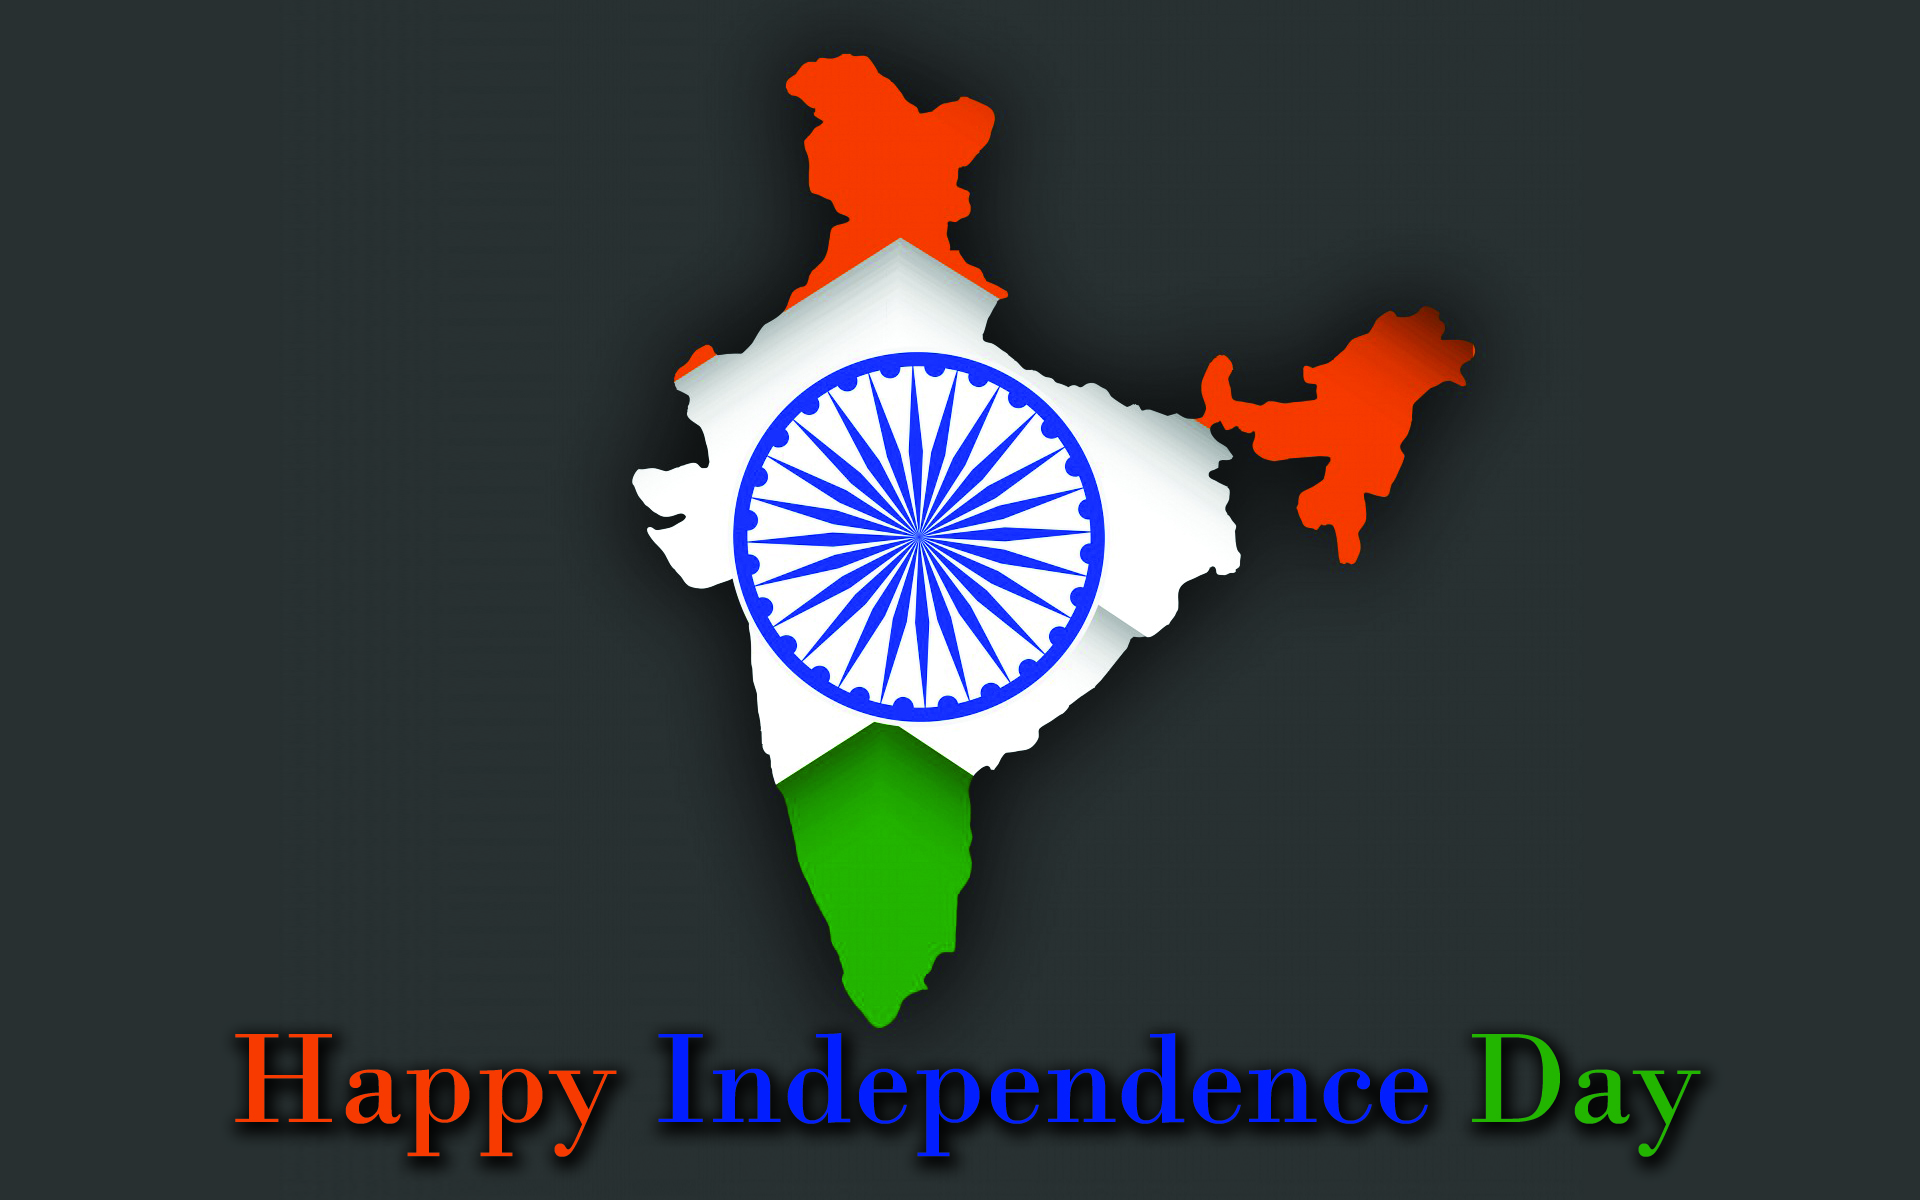 happy independence day greetings hd wallpapers | Free wallpapers